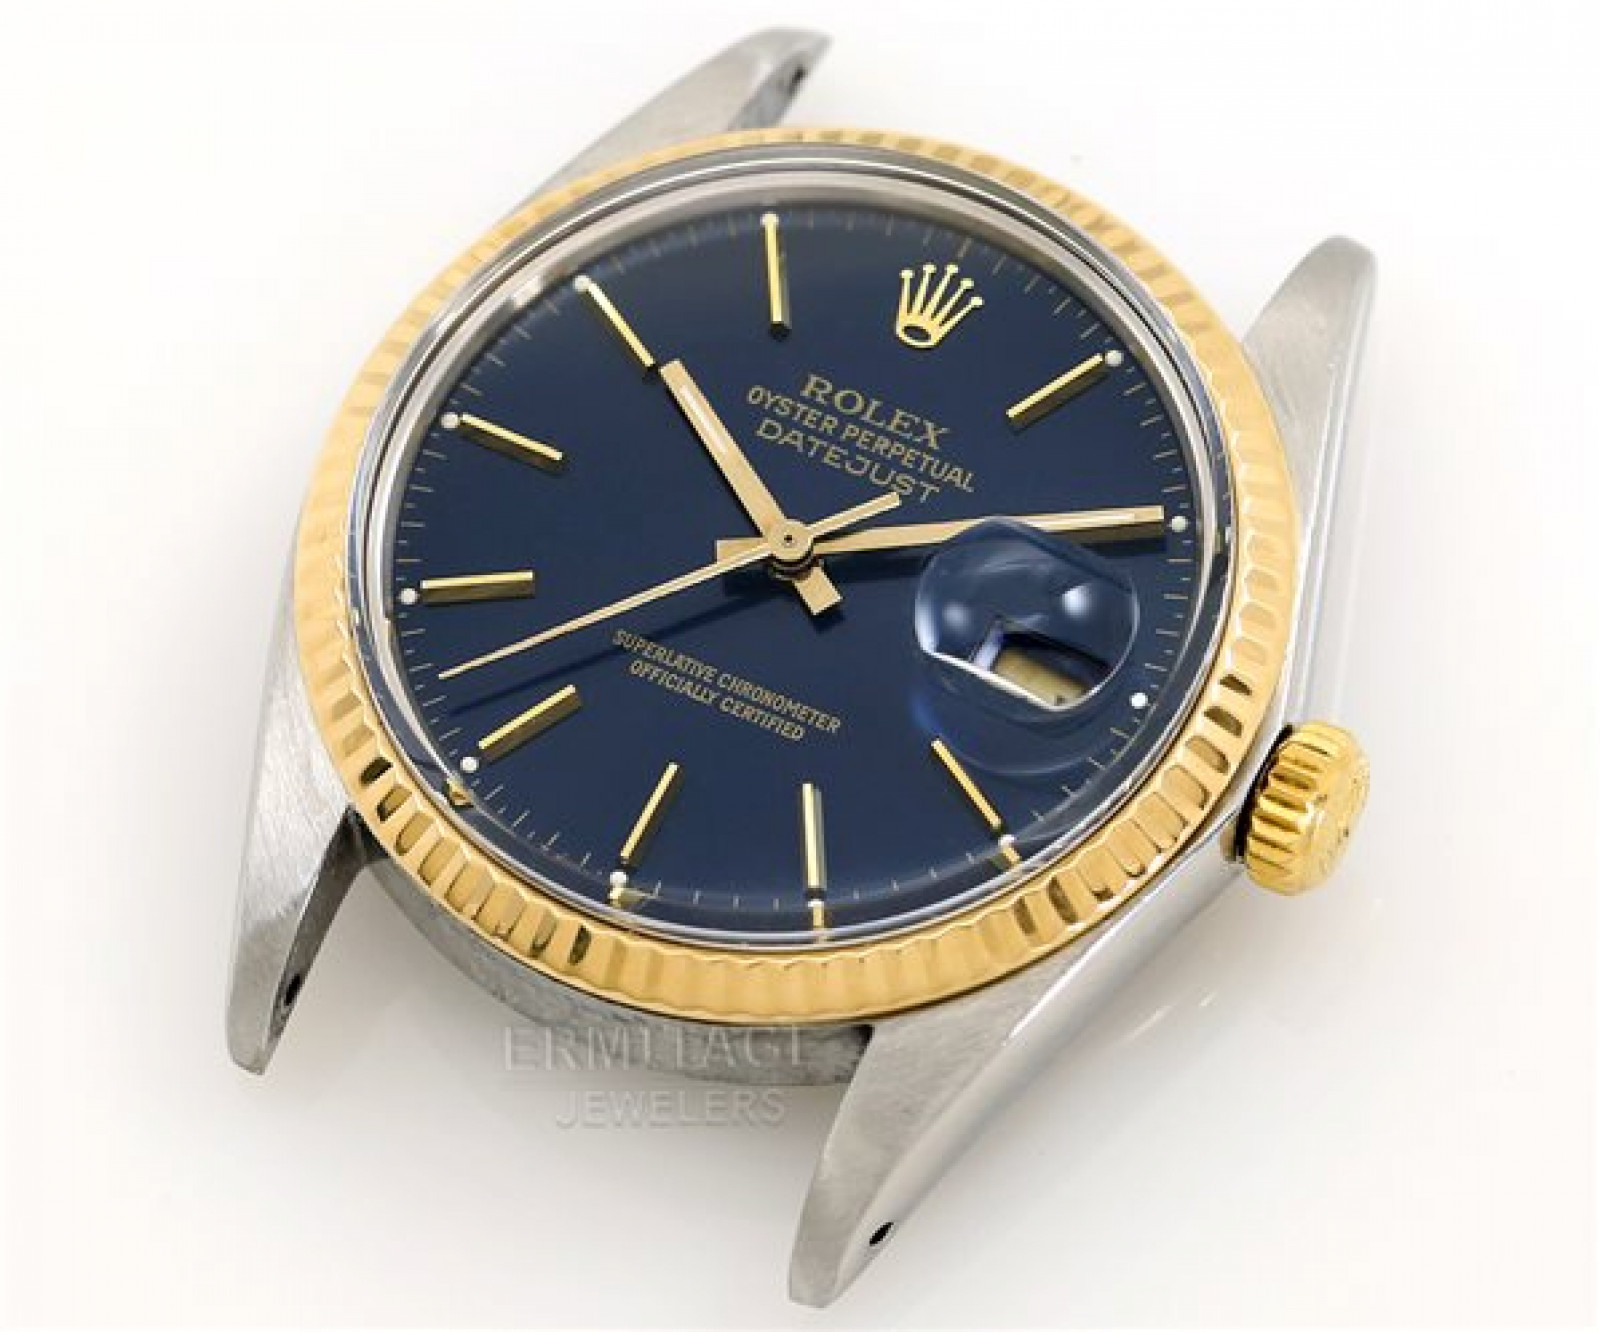 Classic Rolex Datejust 16013 Gold & Steel with Blue Dial